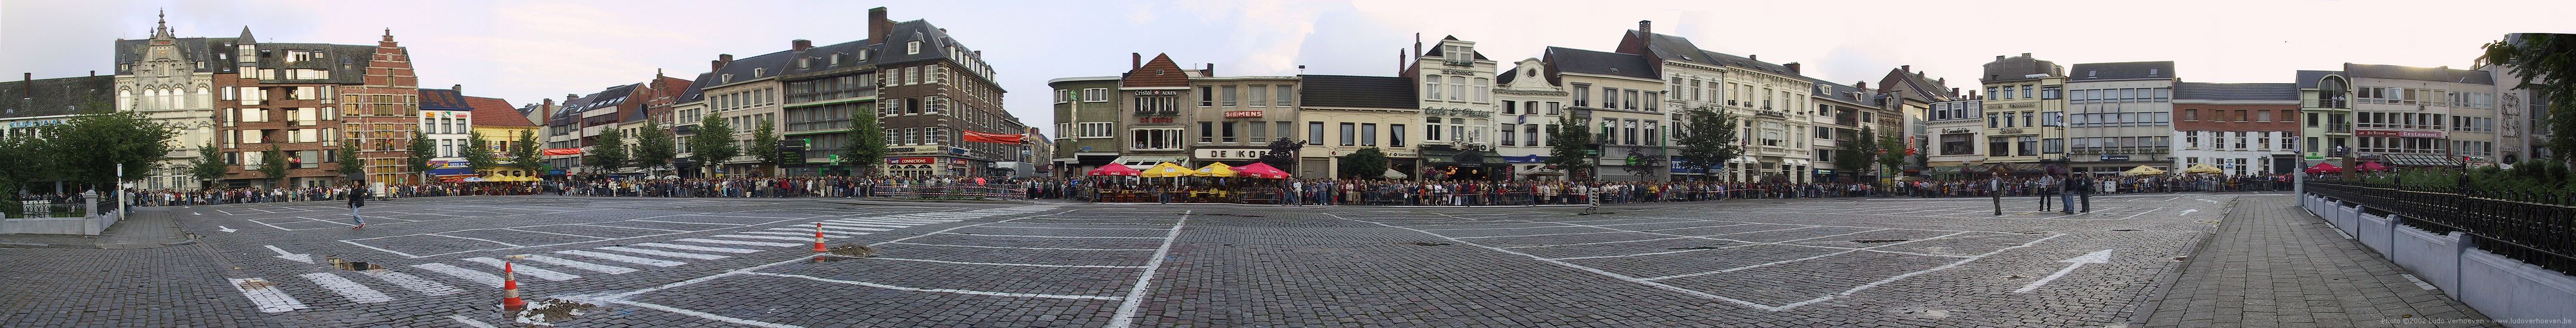 Turnhout<br>De oude Grote Markt - 180 panorama